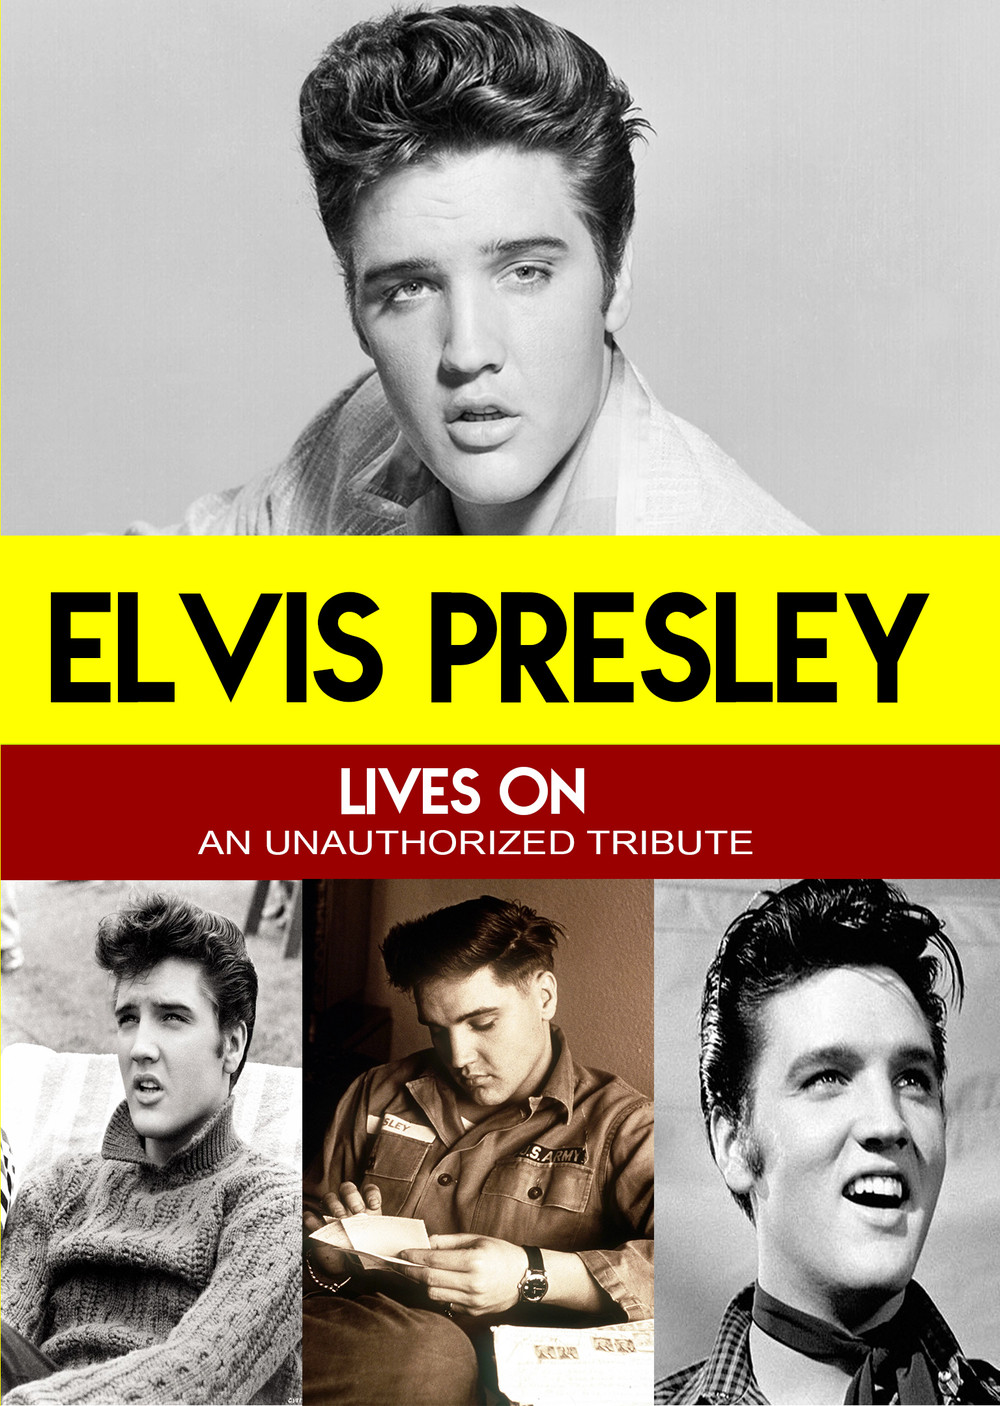 L7806 - Elvis Presley Lives On - An unauthorized Tribute